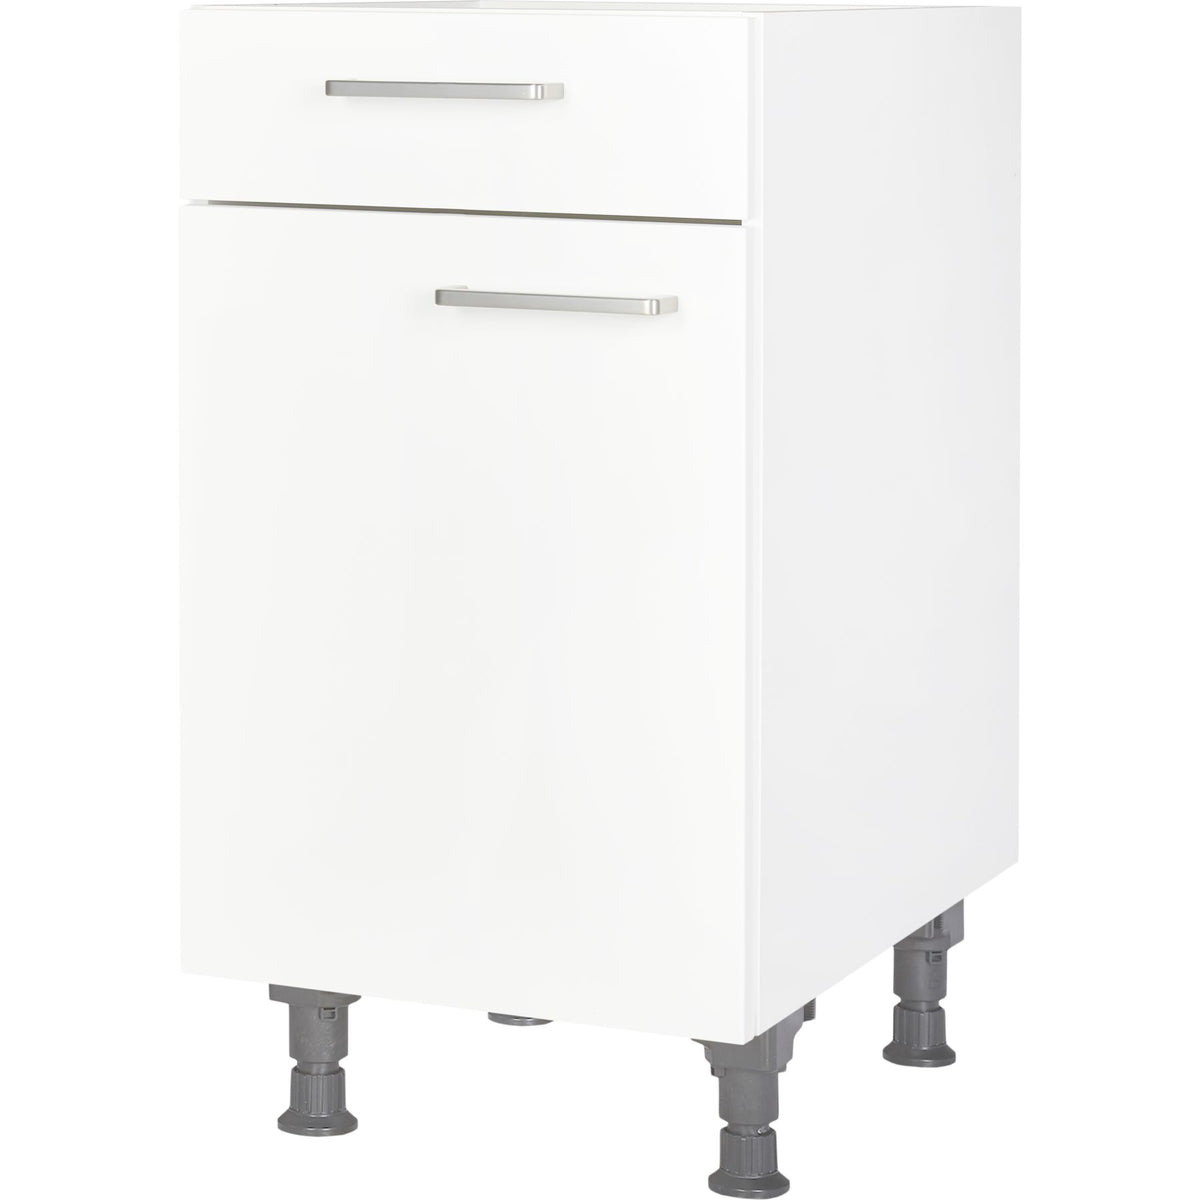 30cm base drawer US white kitchen d cabinet and with 60cm nobilia 45cm